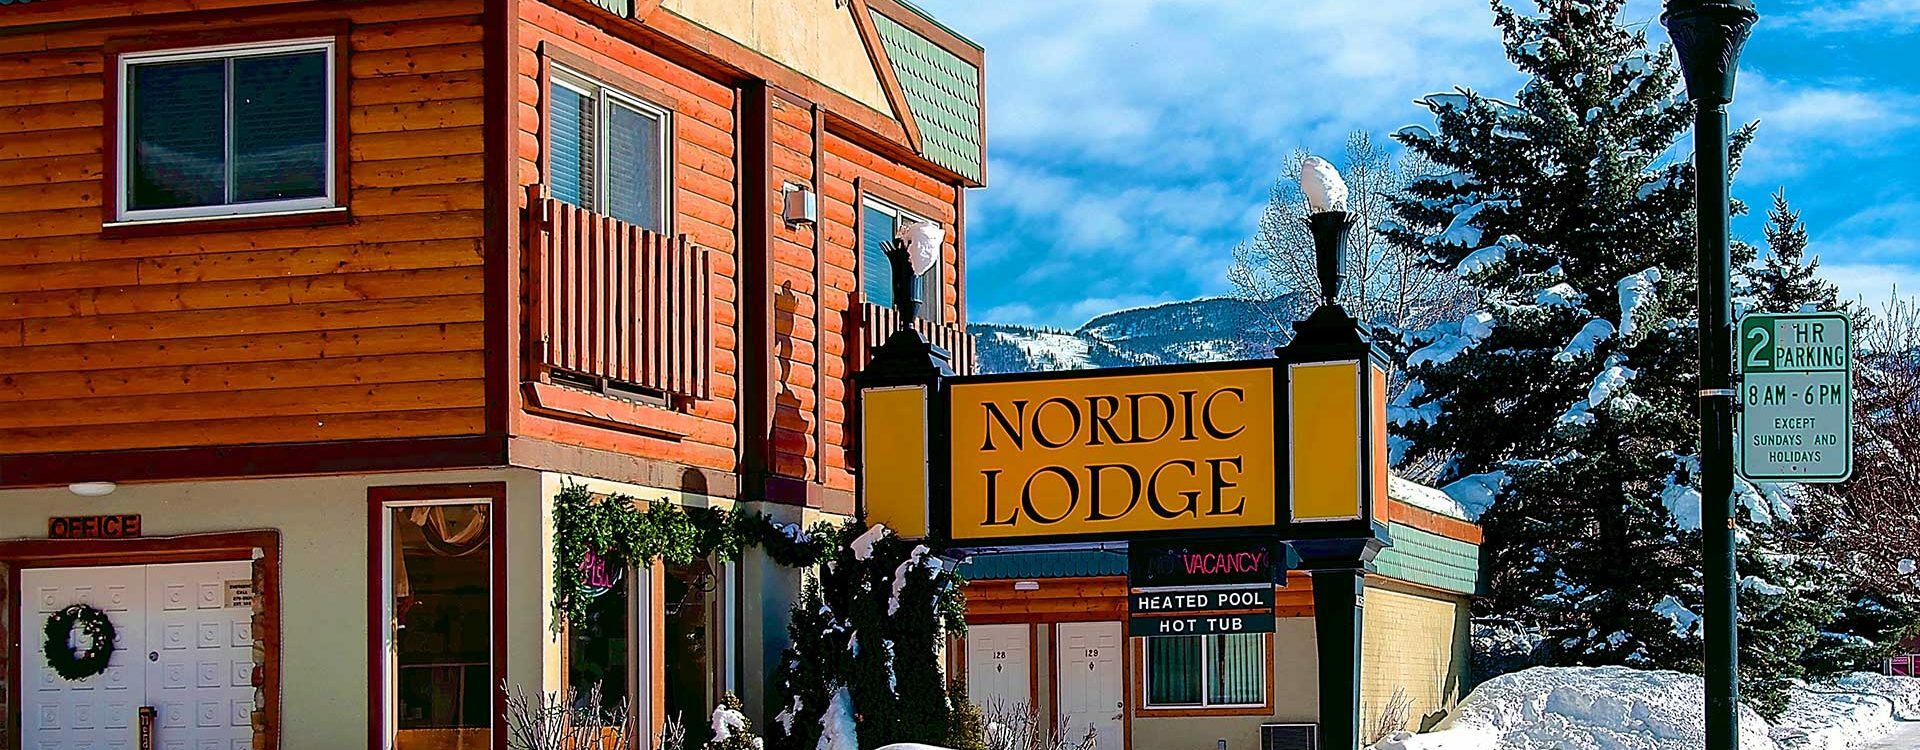 Photo of The Nordic Lodge, Steamboat Springs, CO